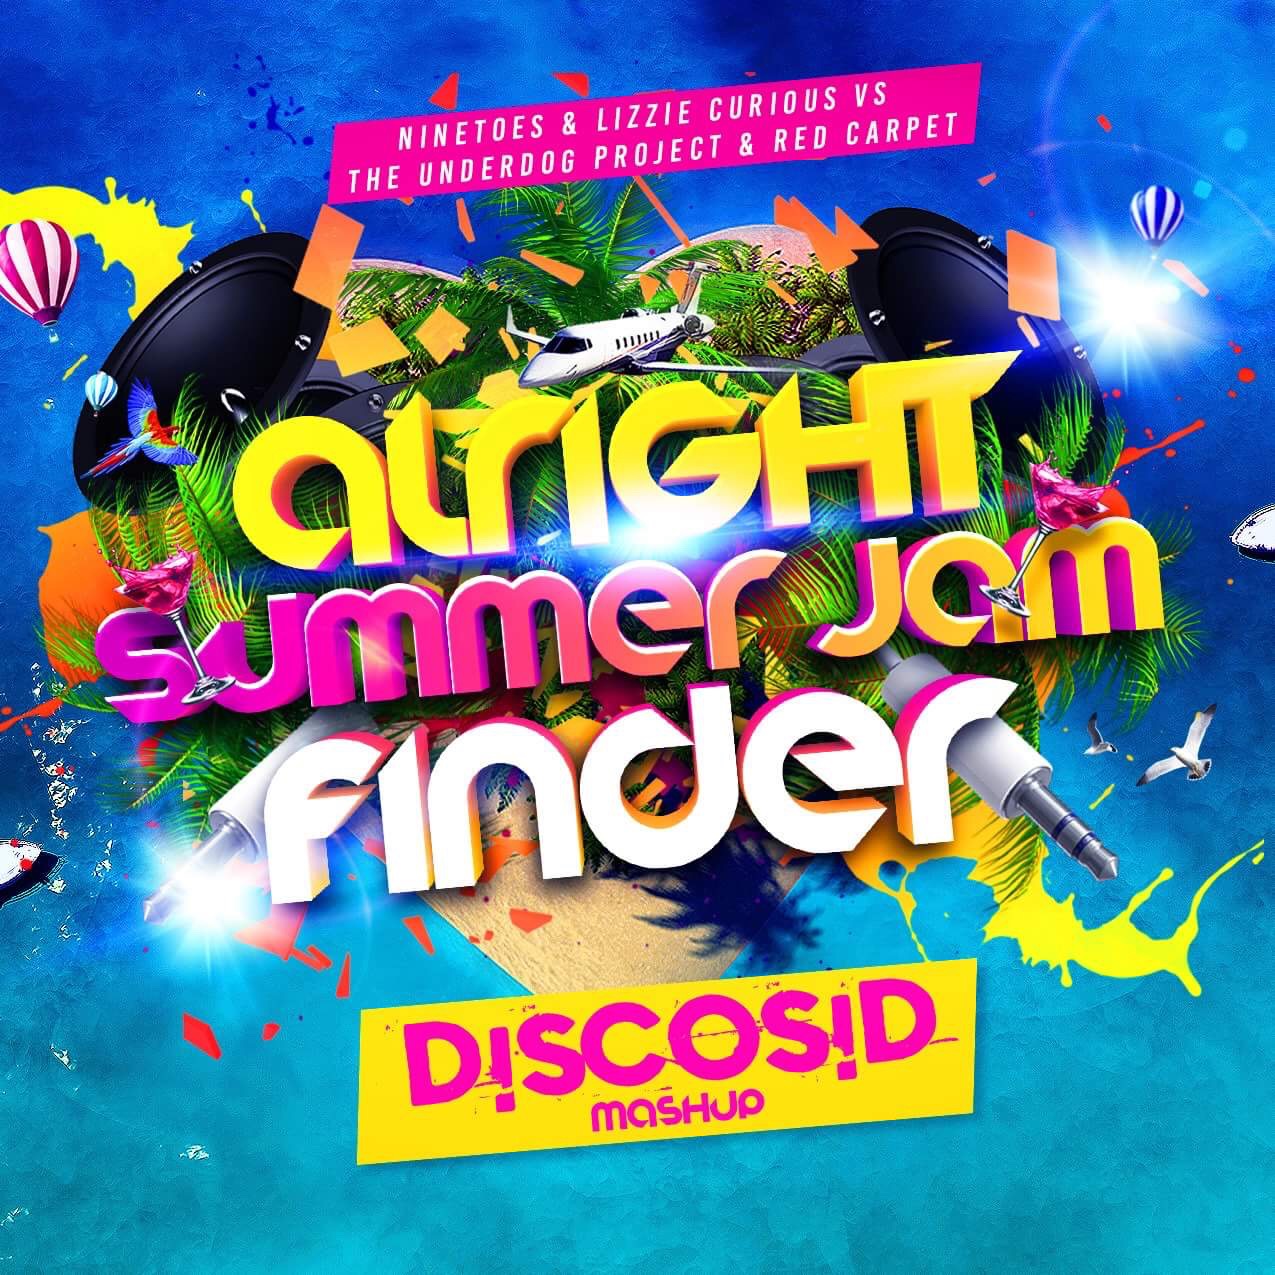 Ninetoes & Lizzie Curious Vs The Underdog Project & Red Carpet - Alright Summer jam Finder (Discosid Mashup)